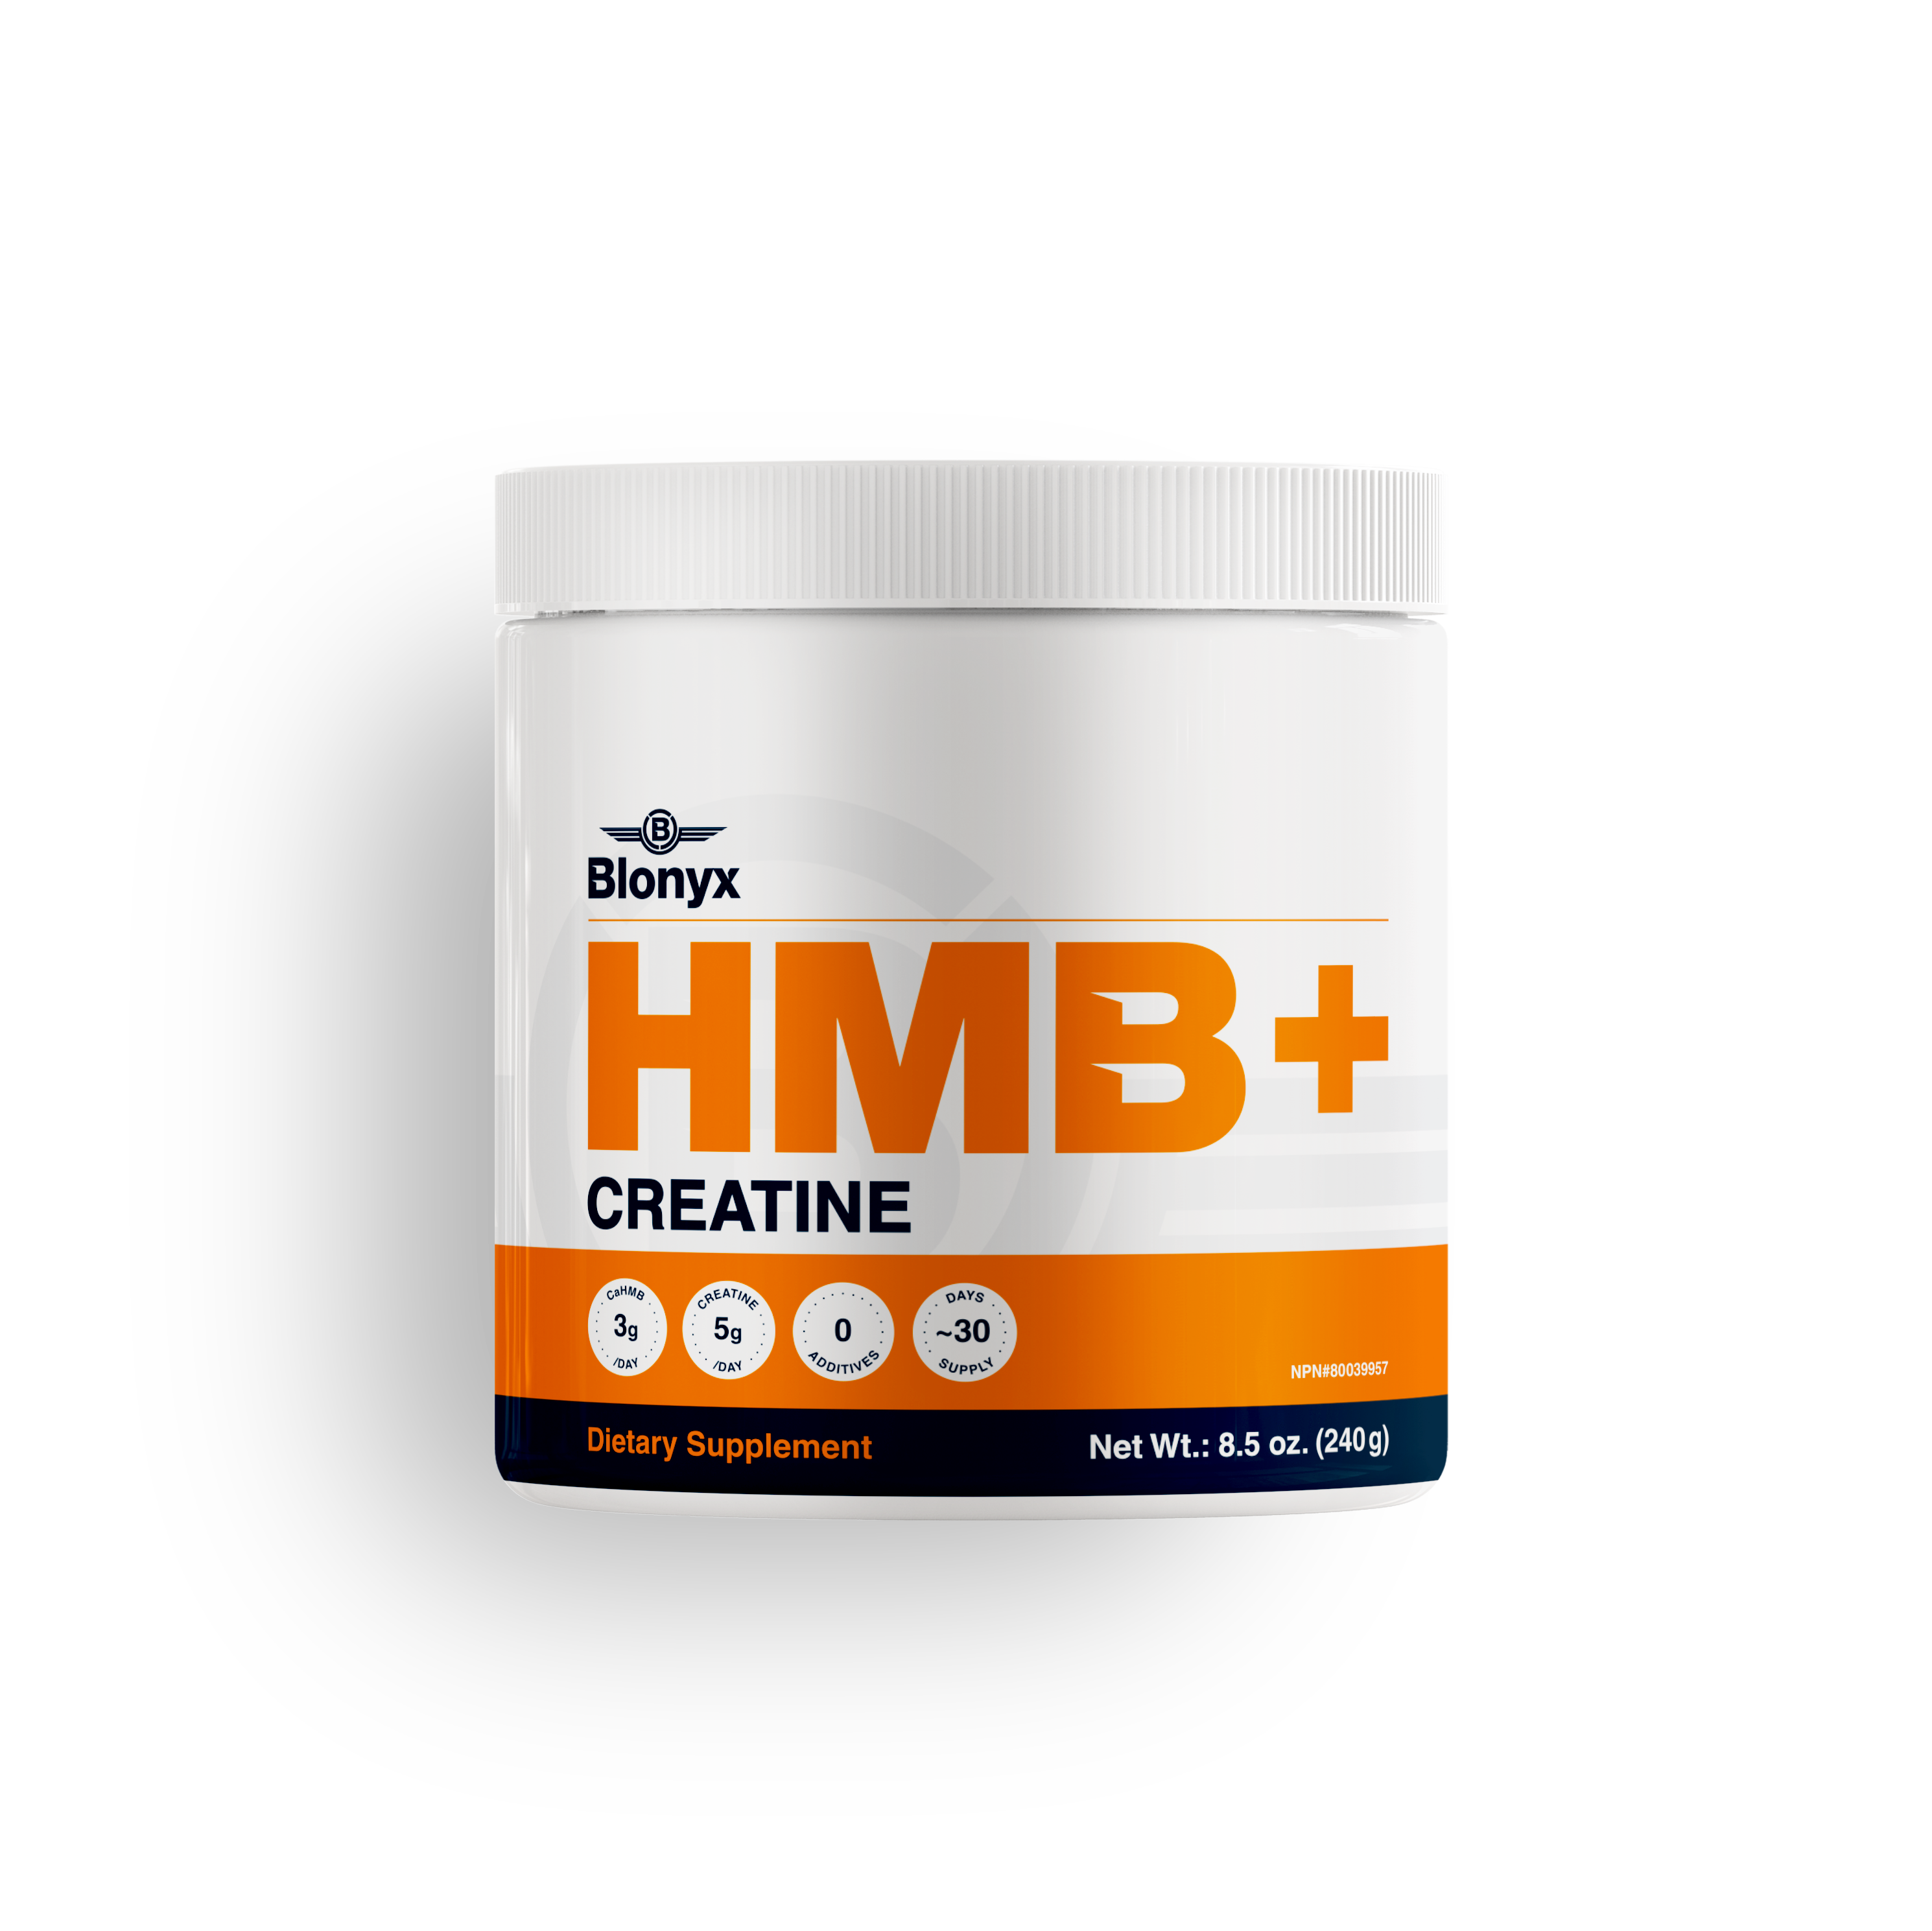 Front of Blonyx HMB+ Creatine container